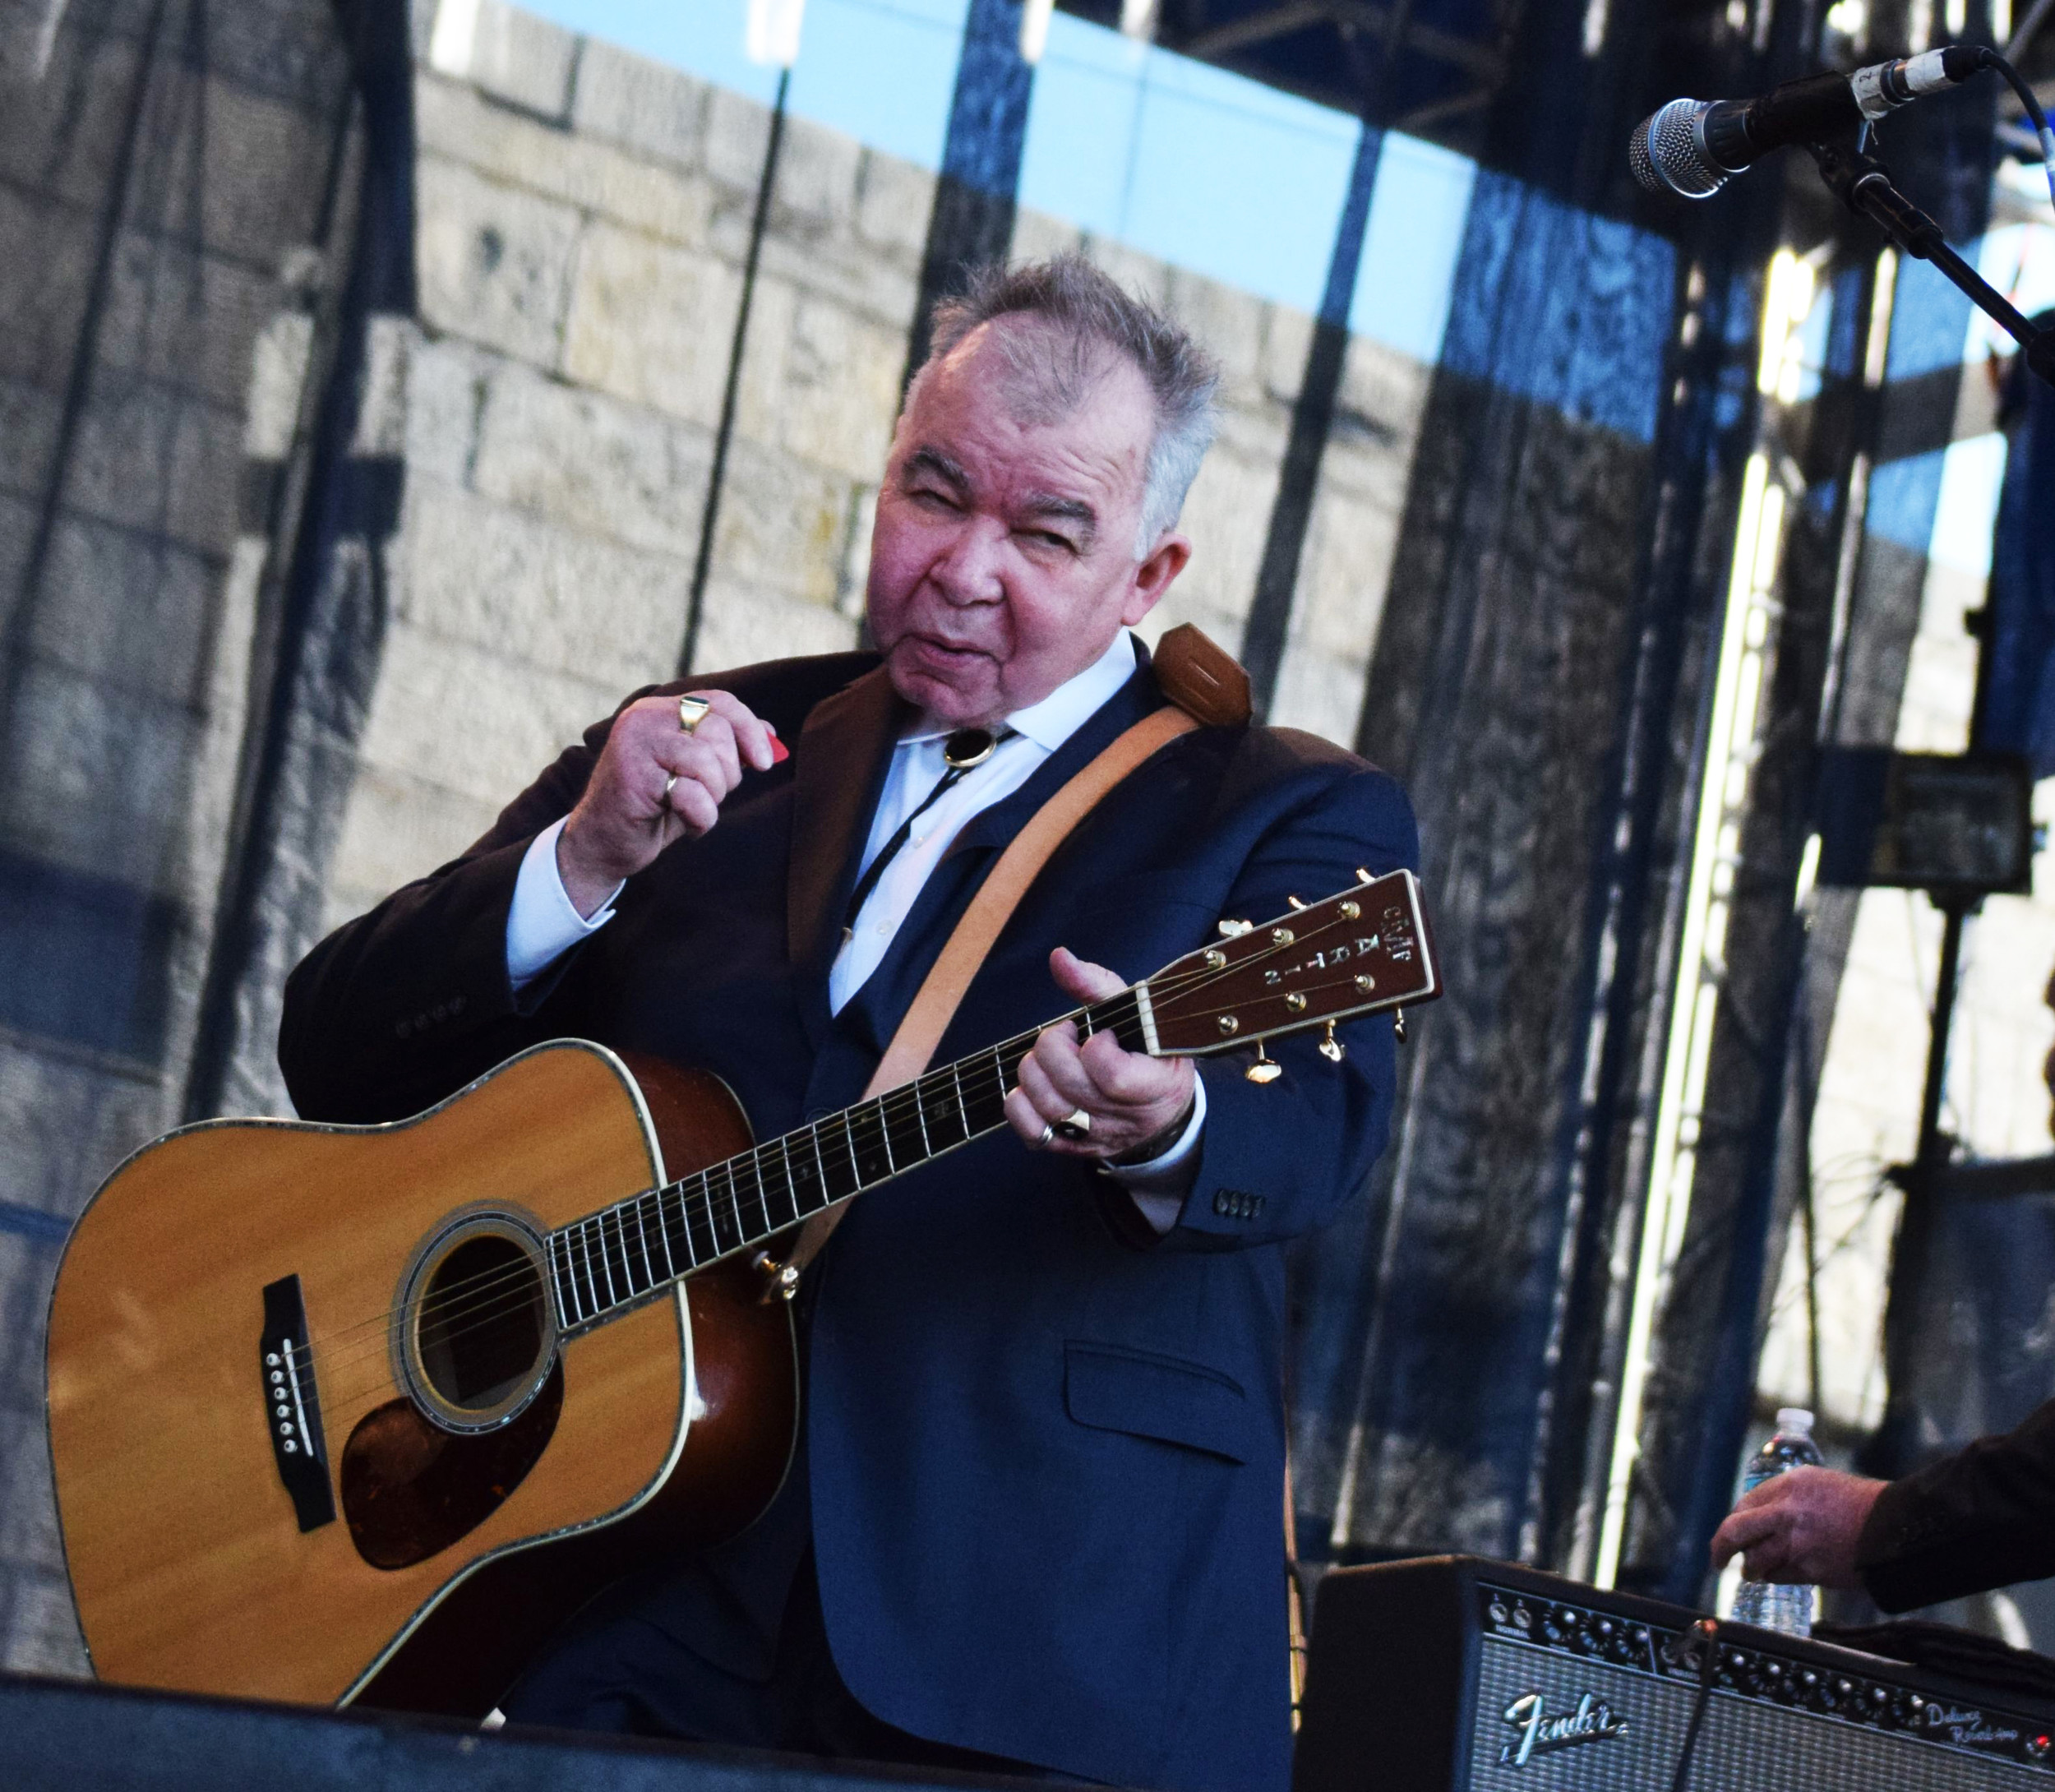 Country and folk singer/songwriter John Prine, 70, closed the 2017 Newport Folk Festival with an all-star band on Sunday, July 30.